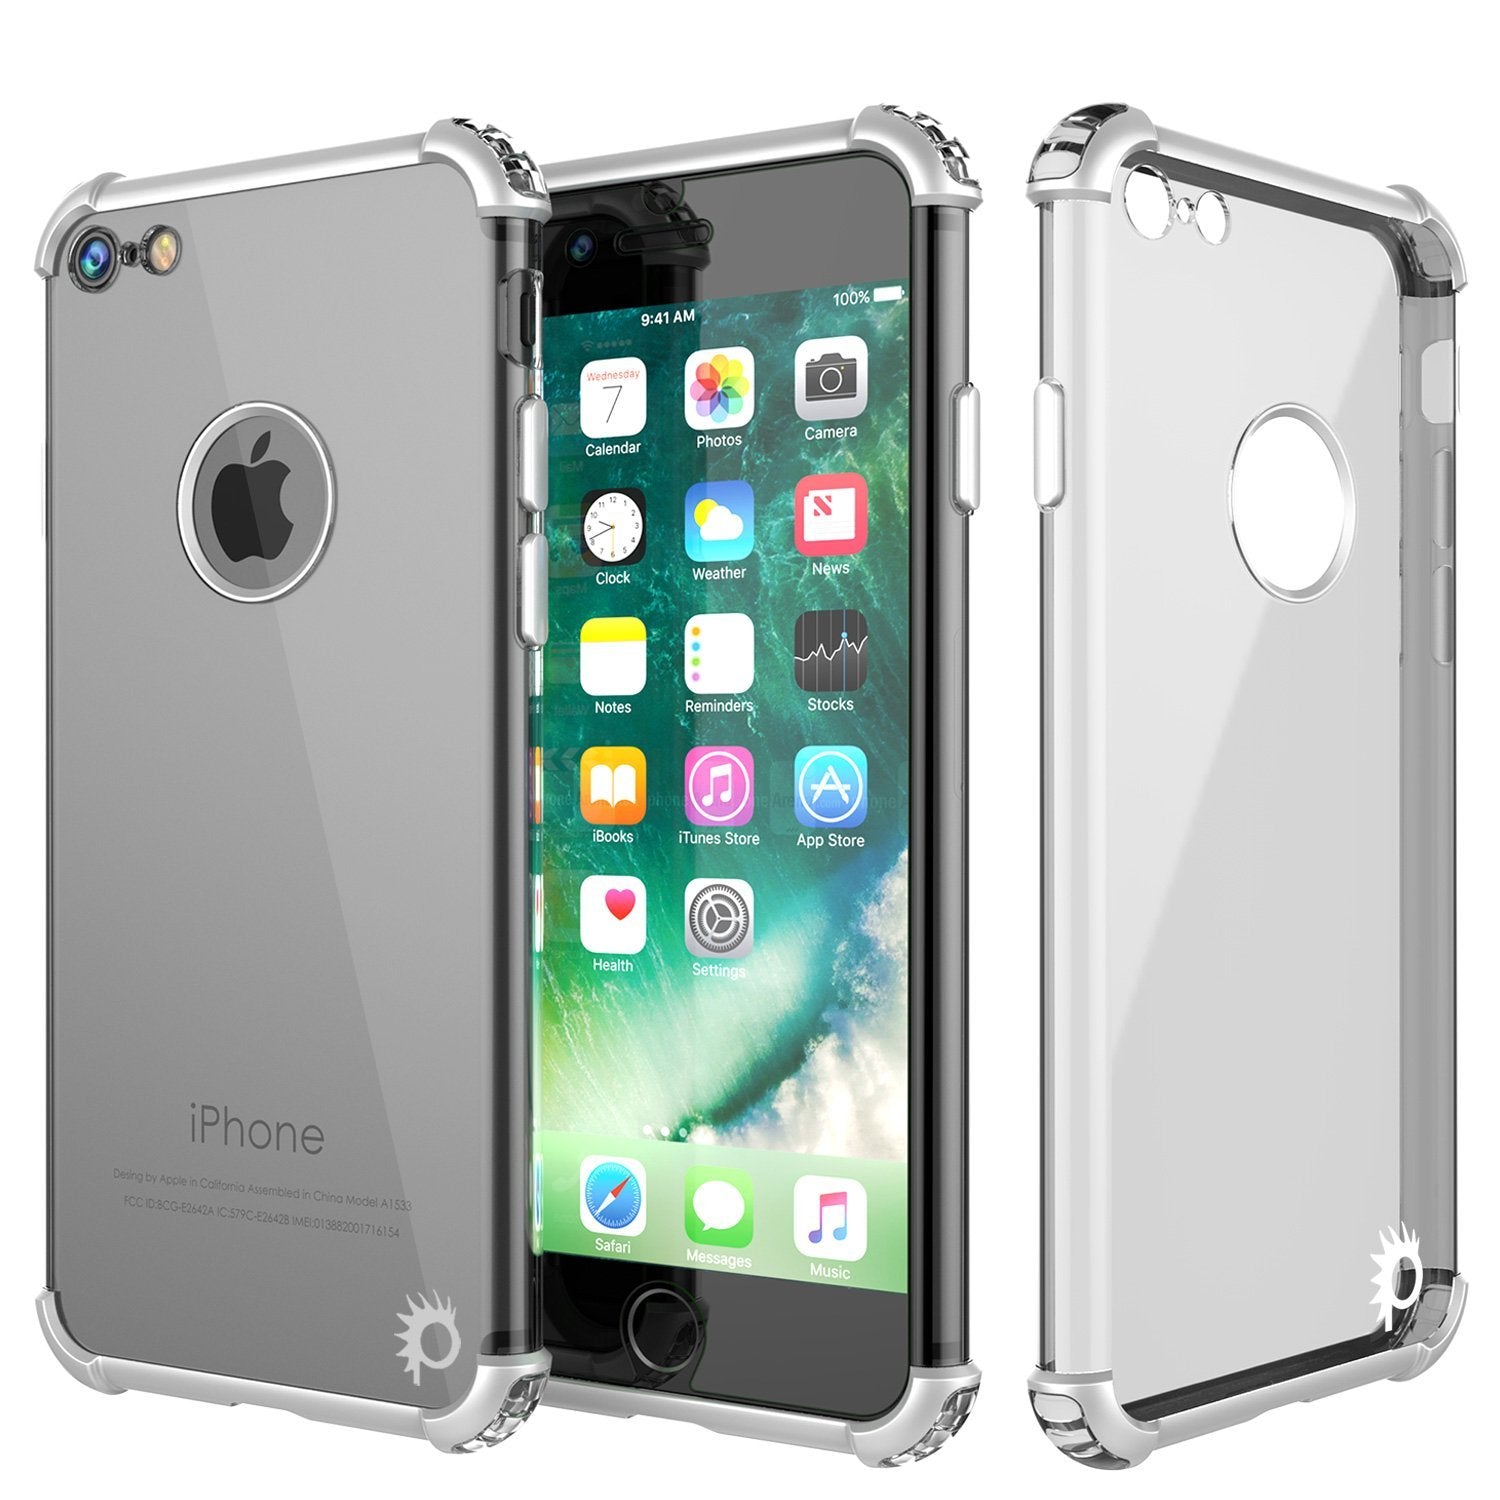 iPhone SE (4.7") Case, Punkcase [BLAZE SERIES] Protective Cover W/ PunkShield Screen Protector [Shockproof] [Slim Fit] for Apple iPhone [Silver] (Color in image: Silver)